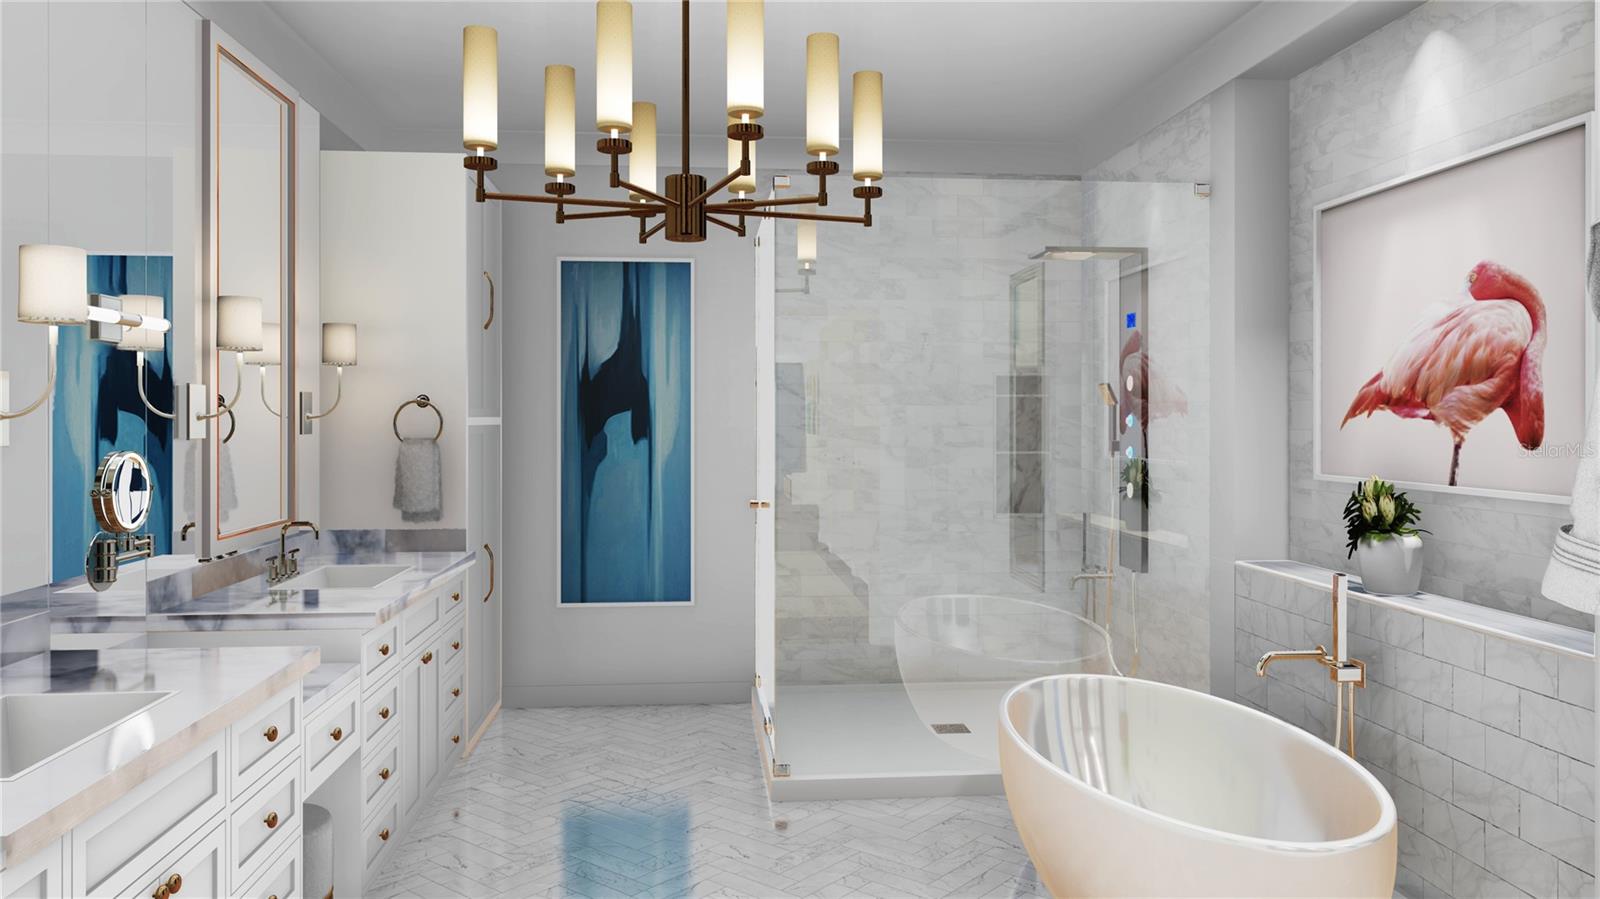 The owners bathroom is very luxurious with two sinks, a vanity, a large walk in shower and soaking tub.